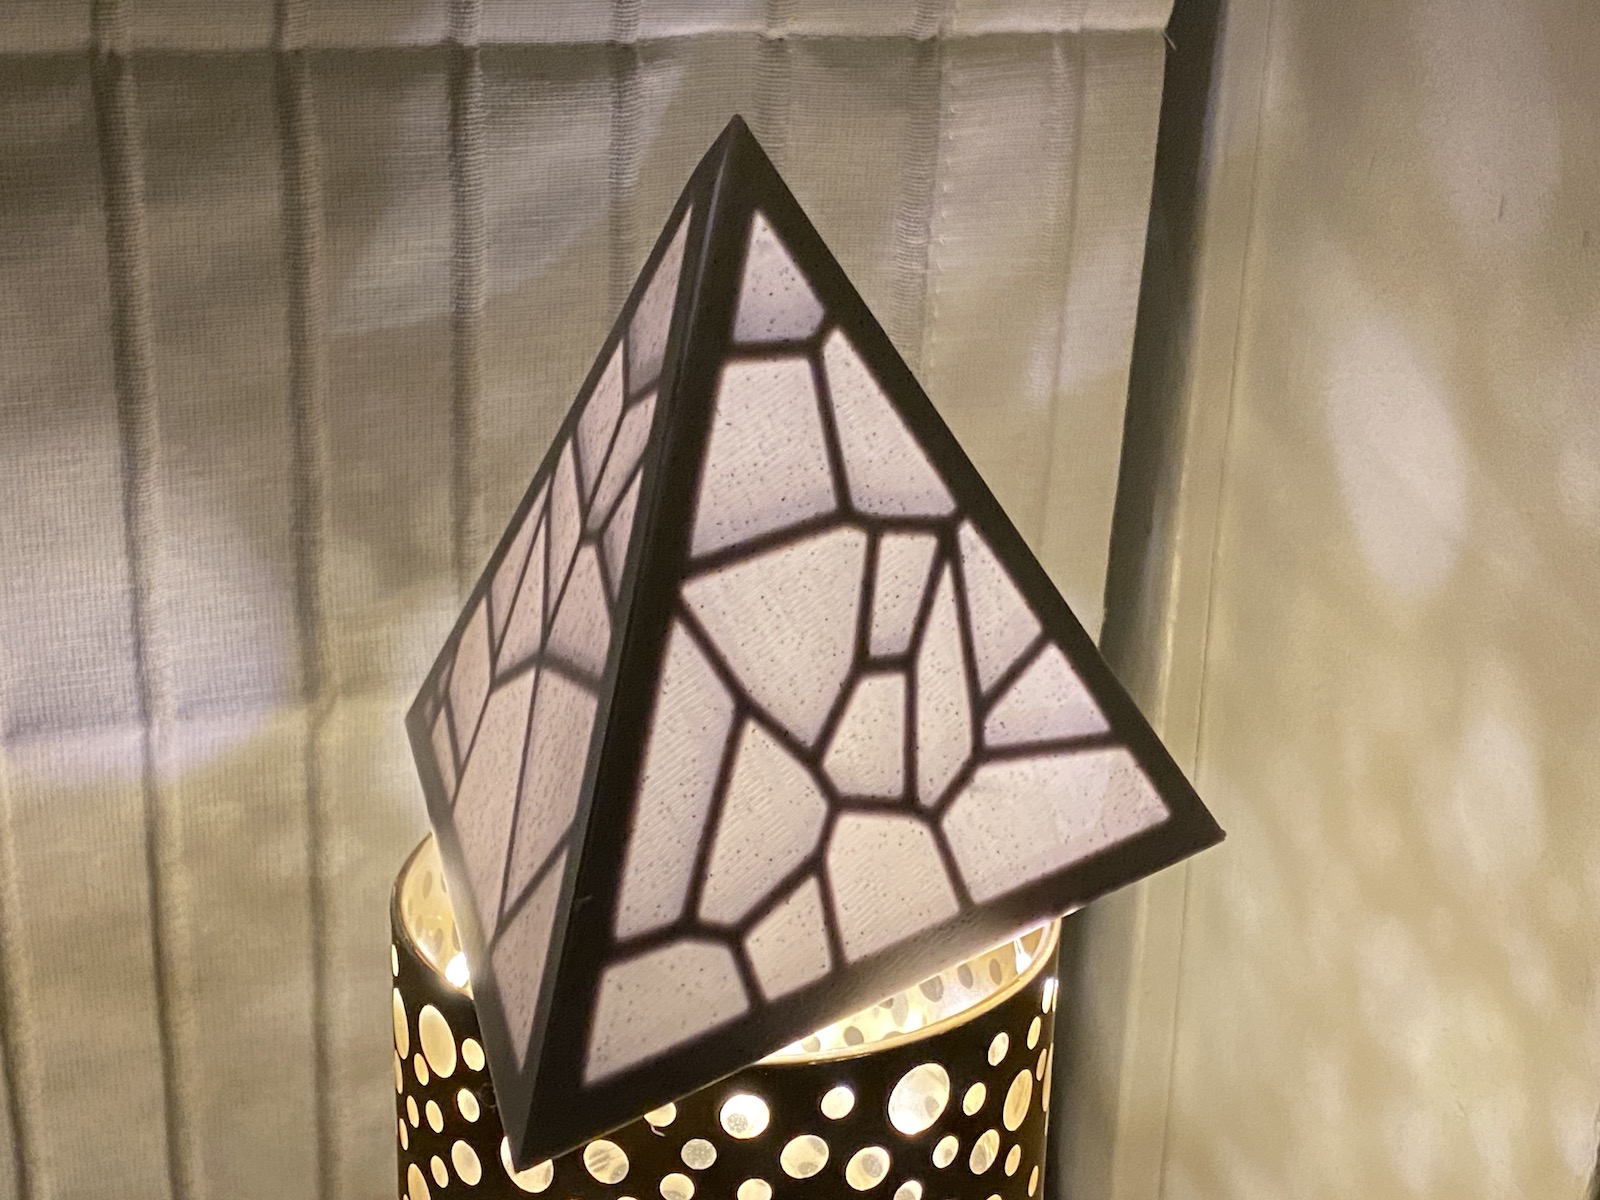 a 3d printed pyramid lit up from inside with lights.